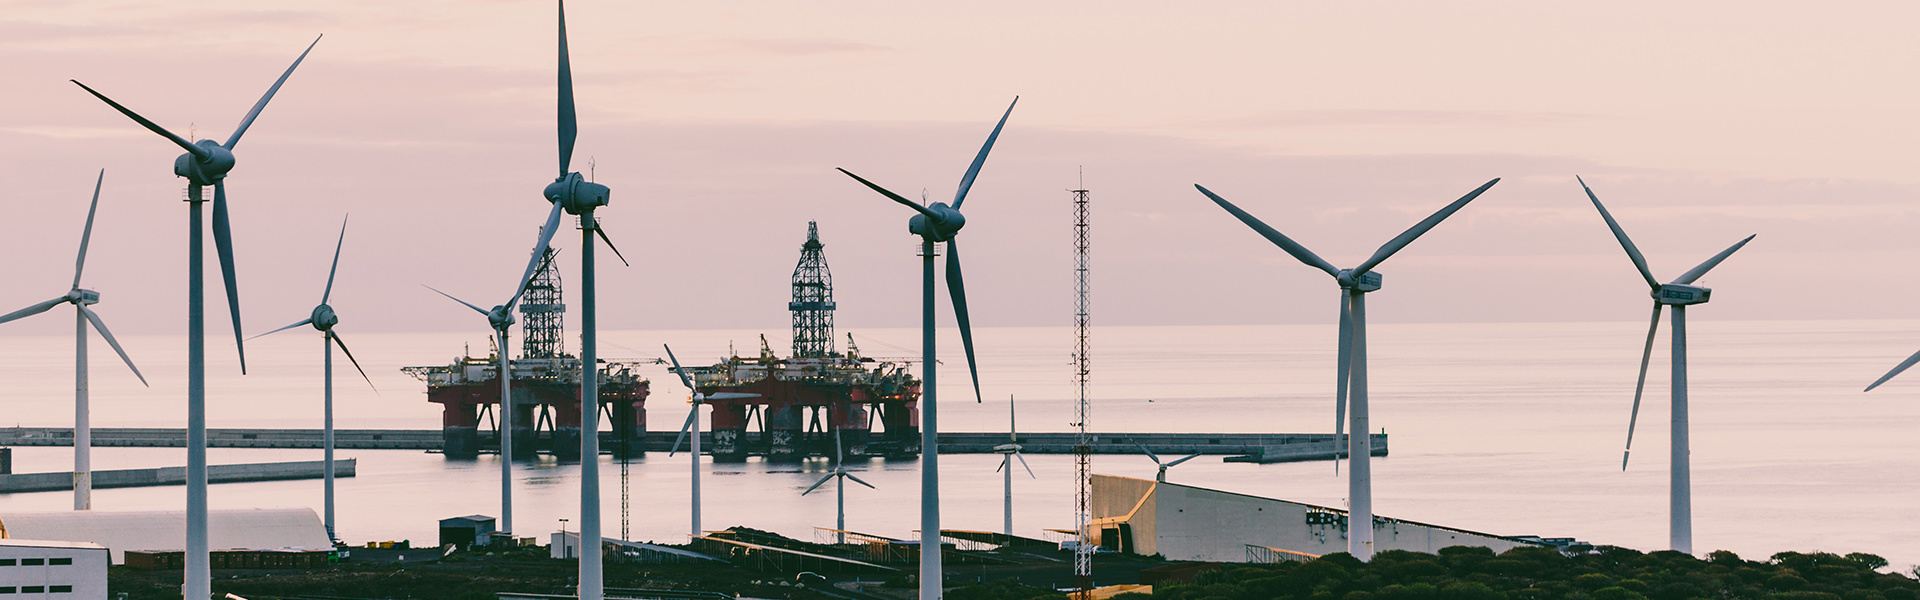 Turbines and oil rigs